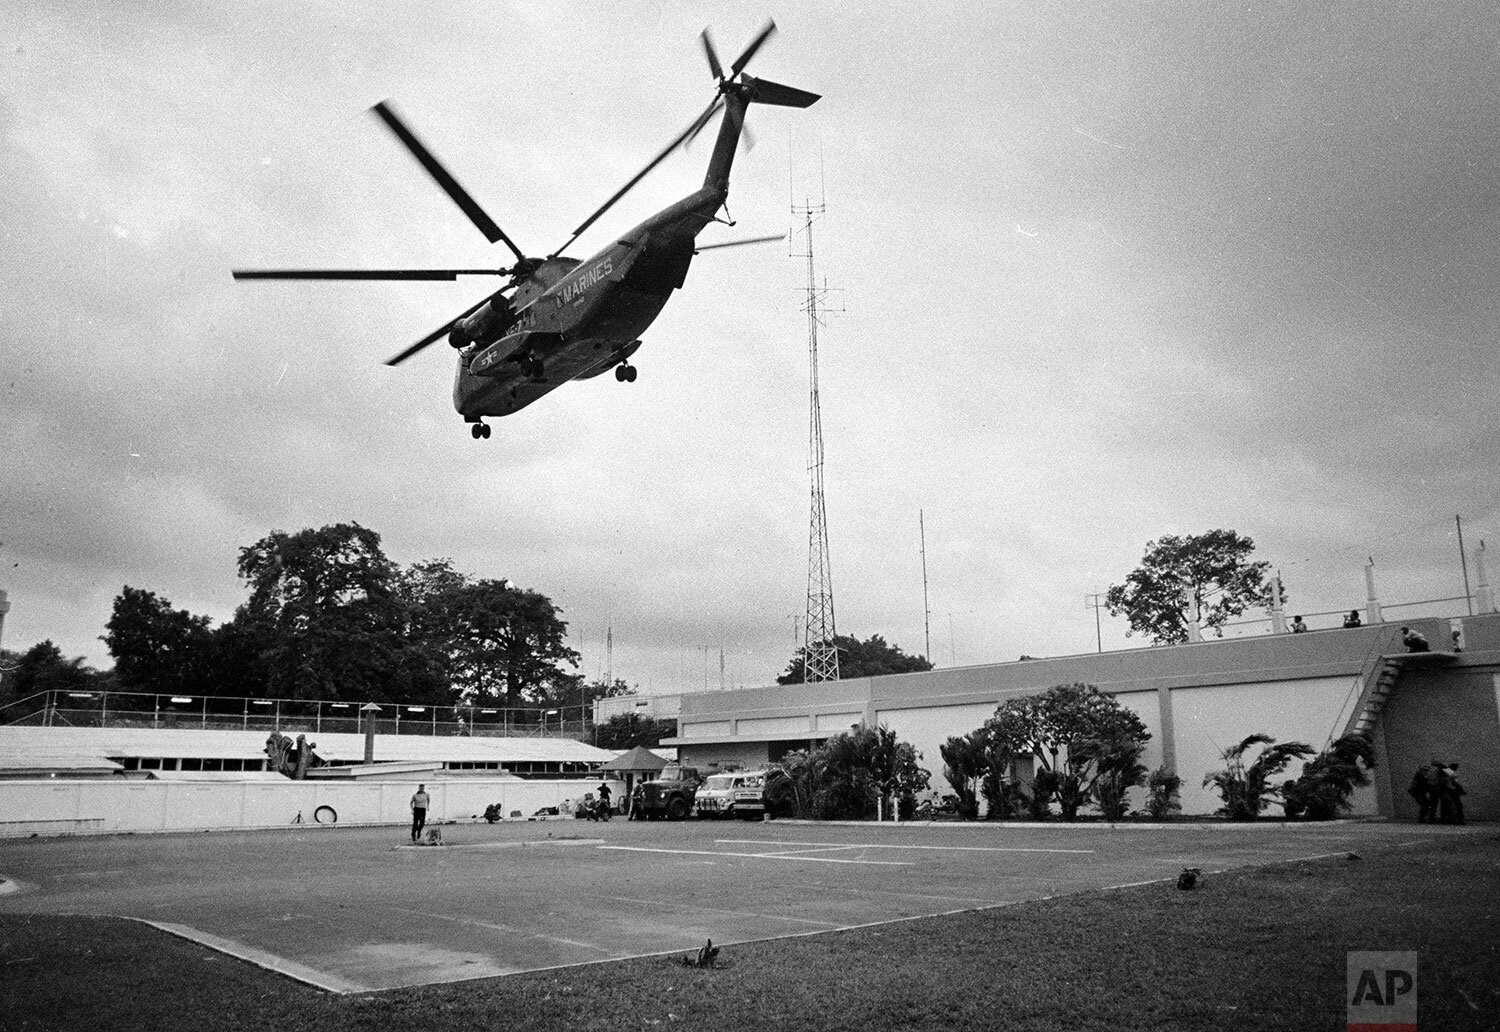  A helicopter lifts off from the U.S. embassy in Saigon, Vietnam during last minute evacuation of authorized personnel and civilians, April 29, 1975. (AP Photo) 